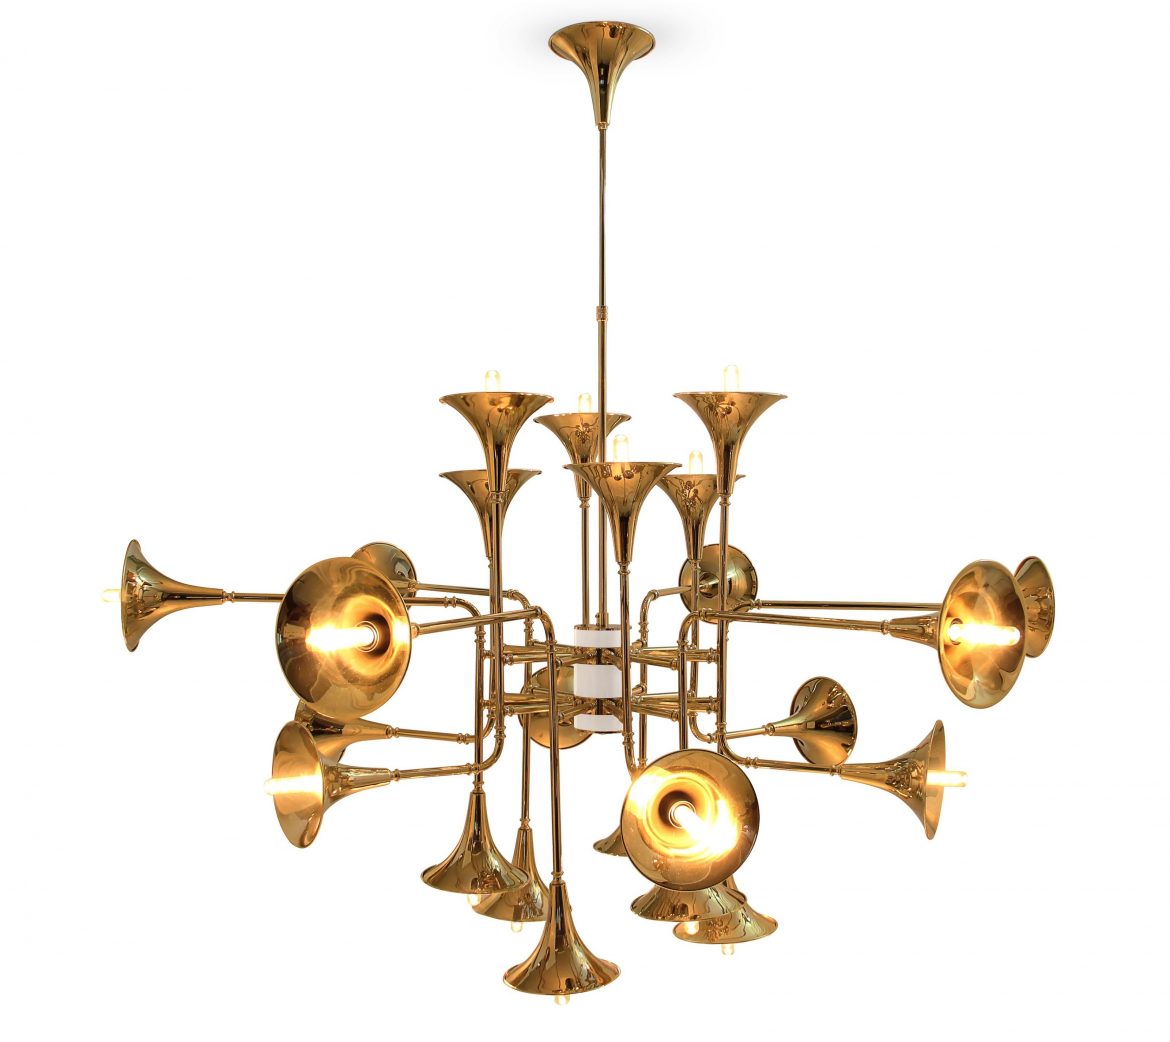 Luxury Lighting Designs For Your Home Decor At Mohd 